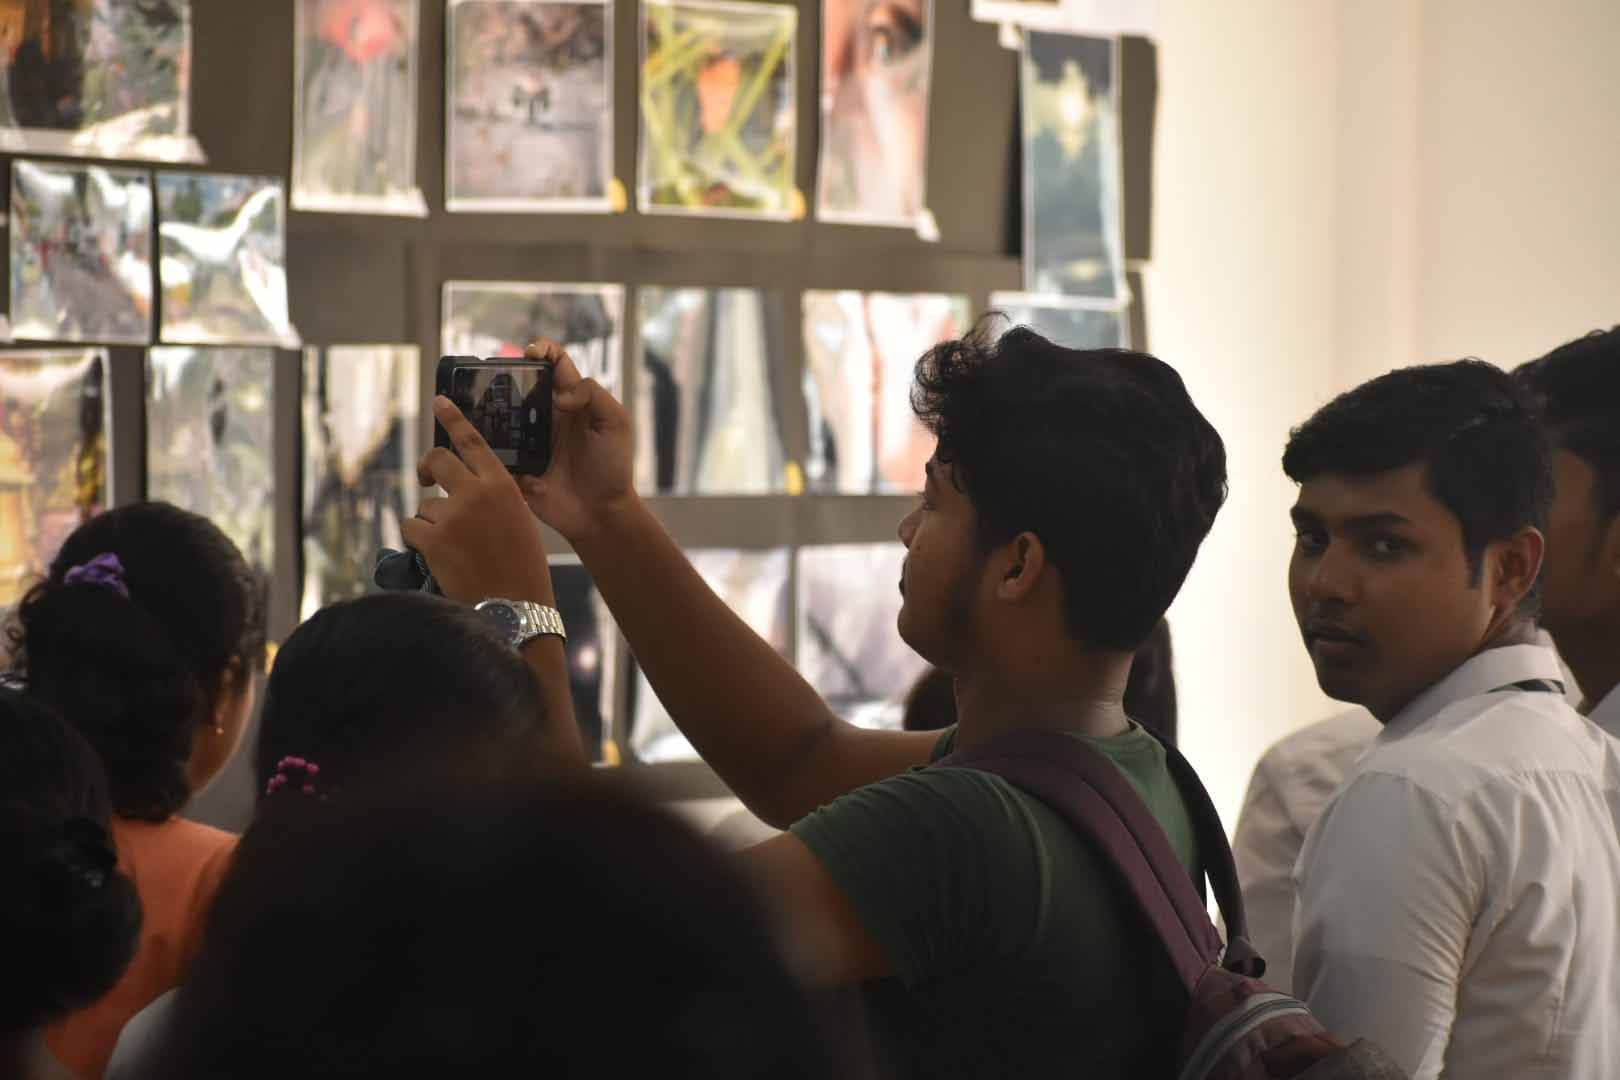 HSS-JMC Photography exhibition on 18th August 2022